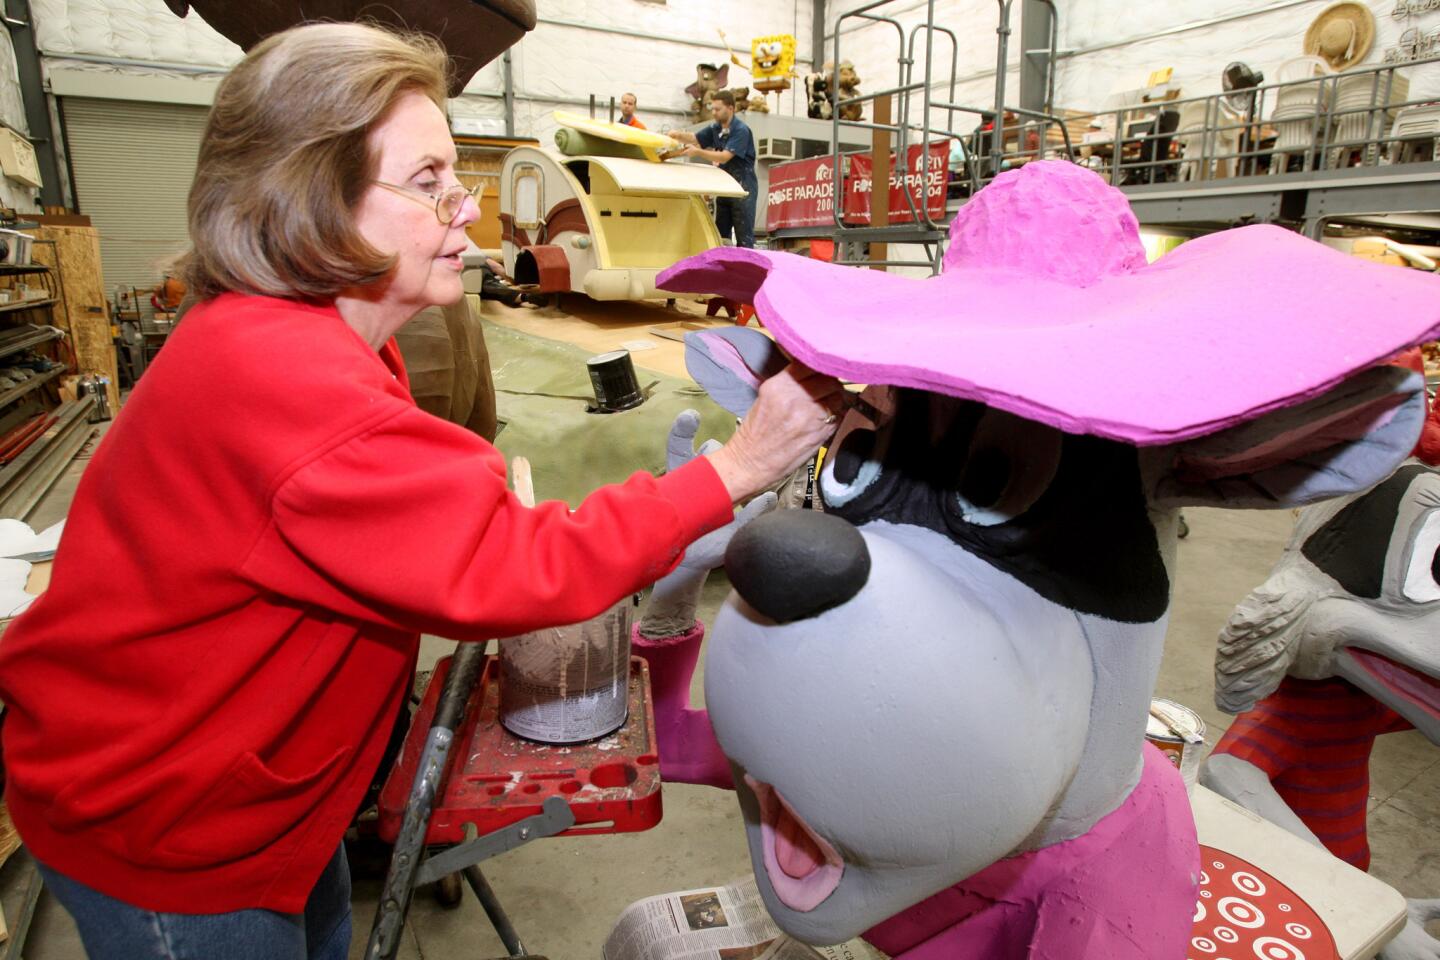 Ginny Meyers paints the mother raccoon character for the Burbank Tournament of Roses Assn.'s float at the construction site in Burbank on Saturday, Dec. 26, 2015. Meyers has been volunteering at this location on and off since 1963. The float's theme this year is "Are We There Yet?"